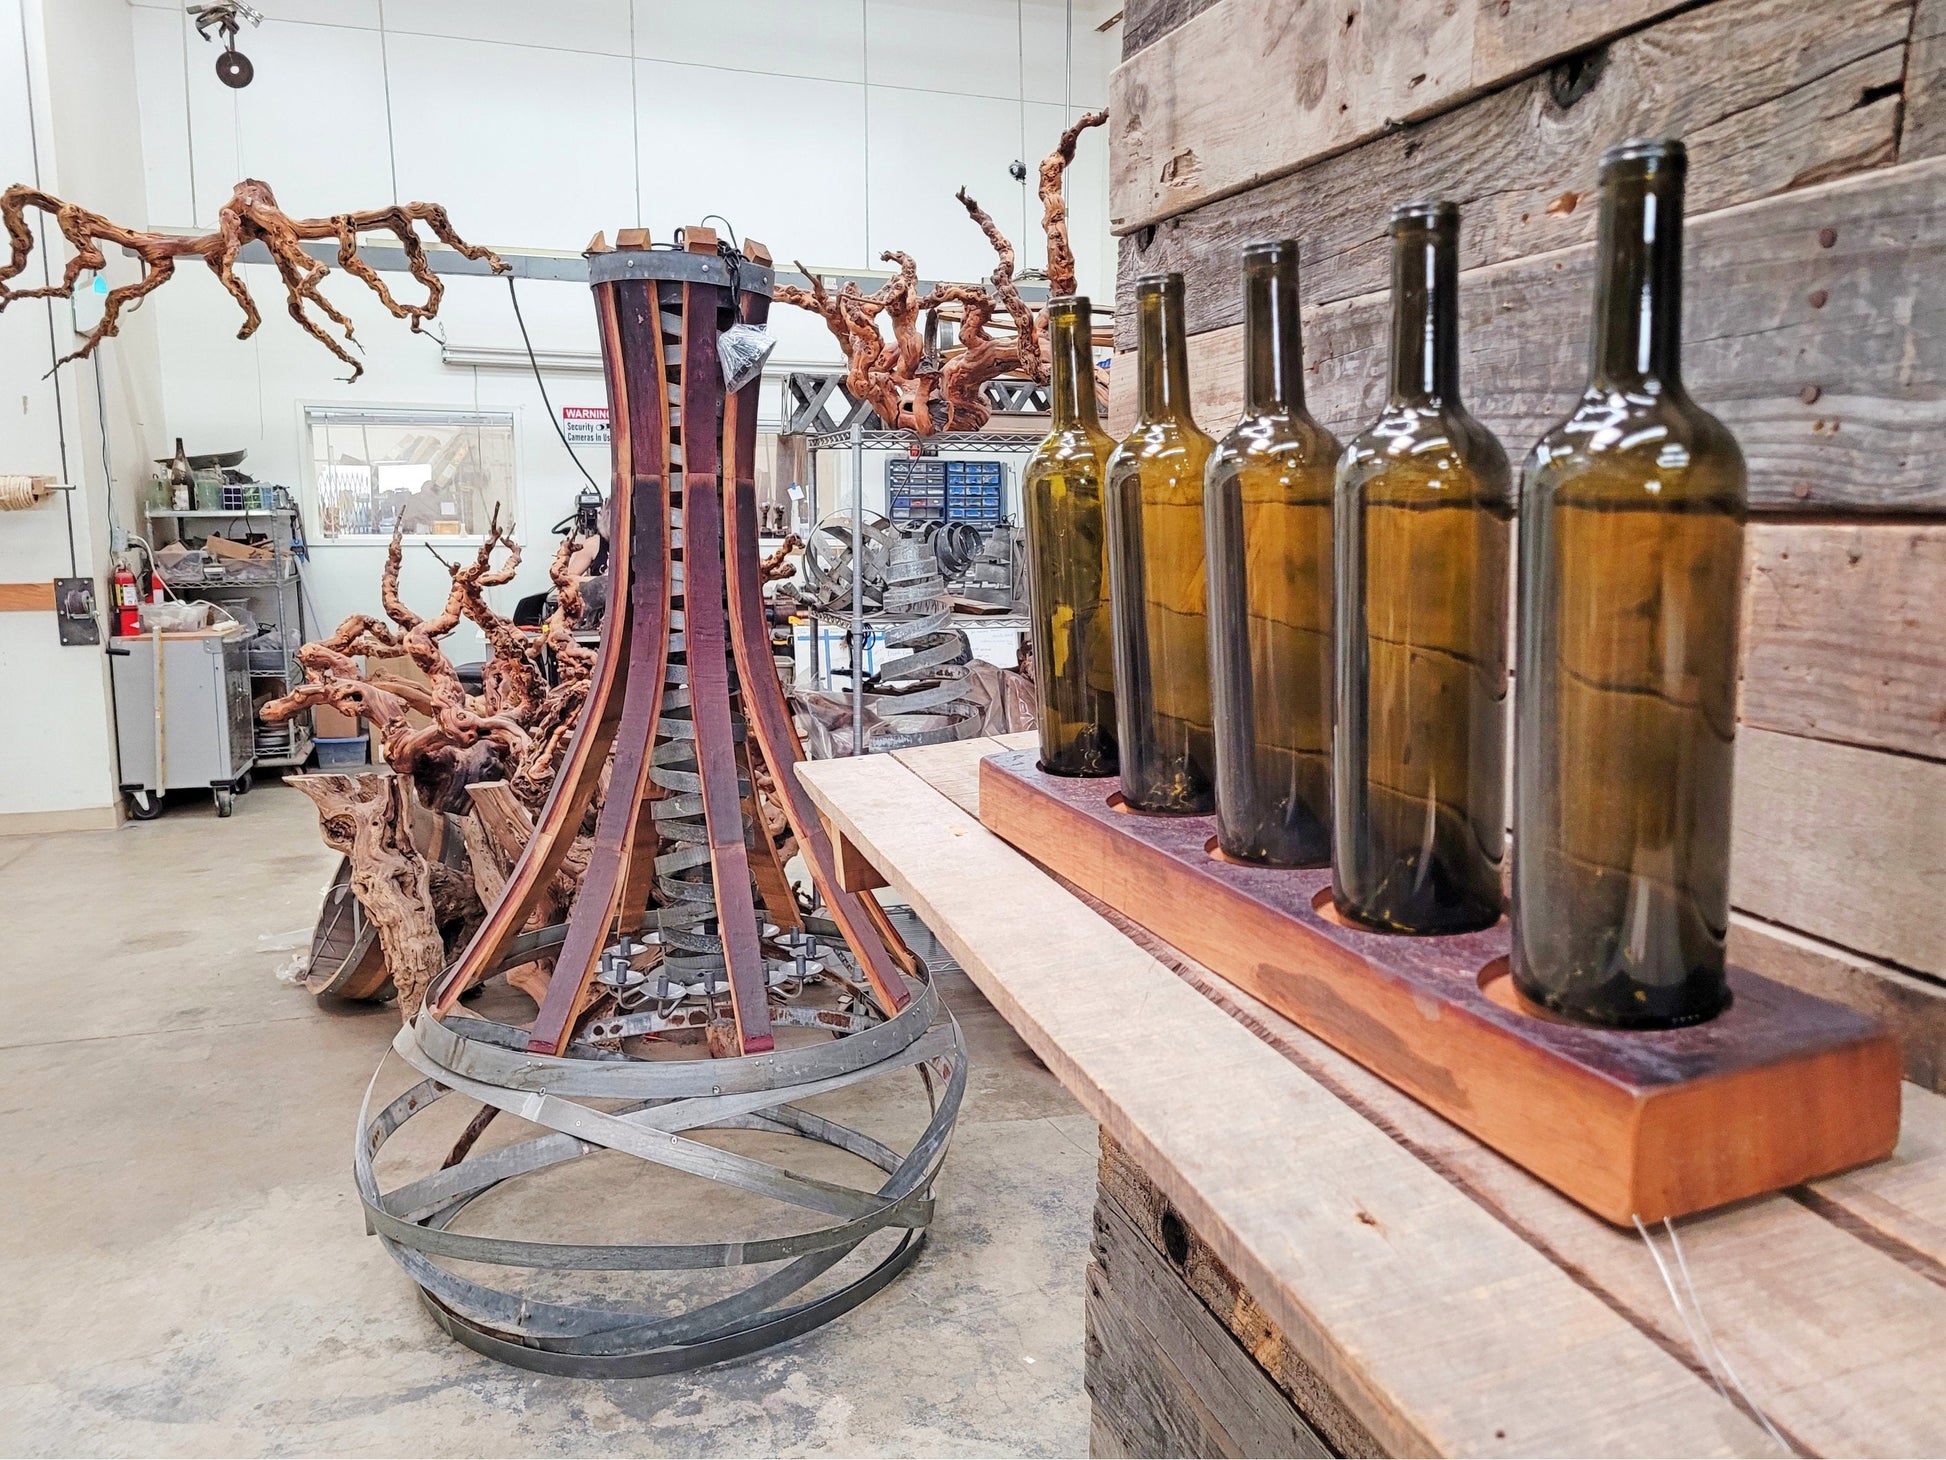 SALE Charles Krug Wine Barrel 5 Bottle Holder - Made from retired California - 100% Recycled and Ready to Ship! 092822-8